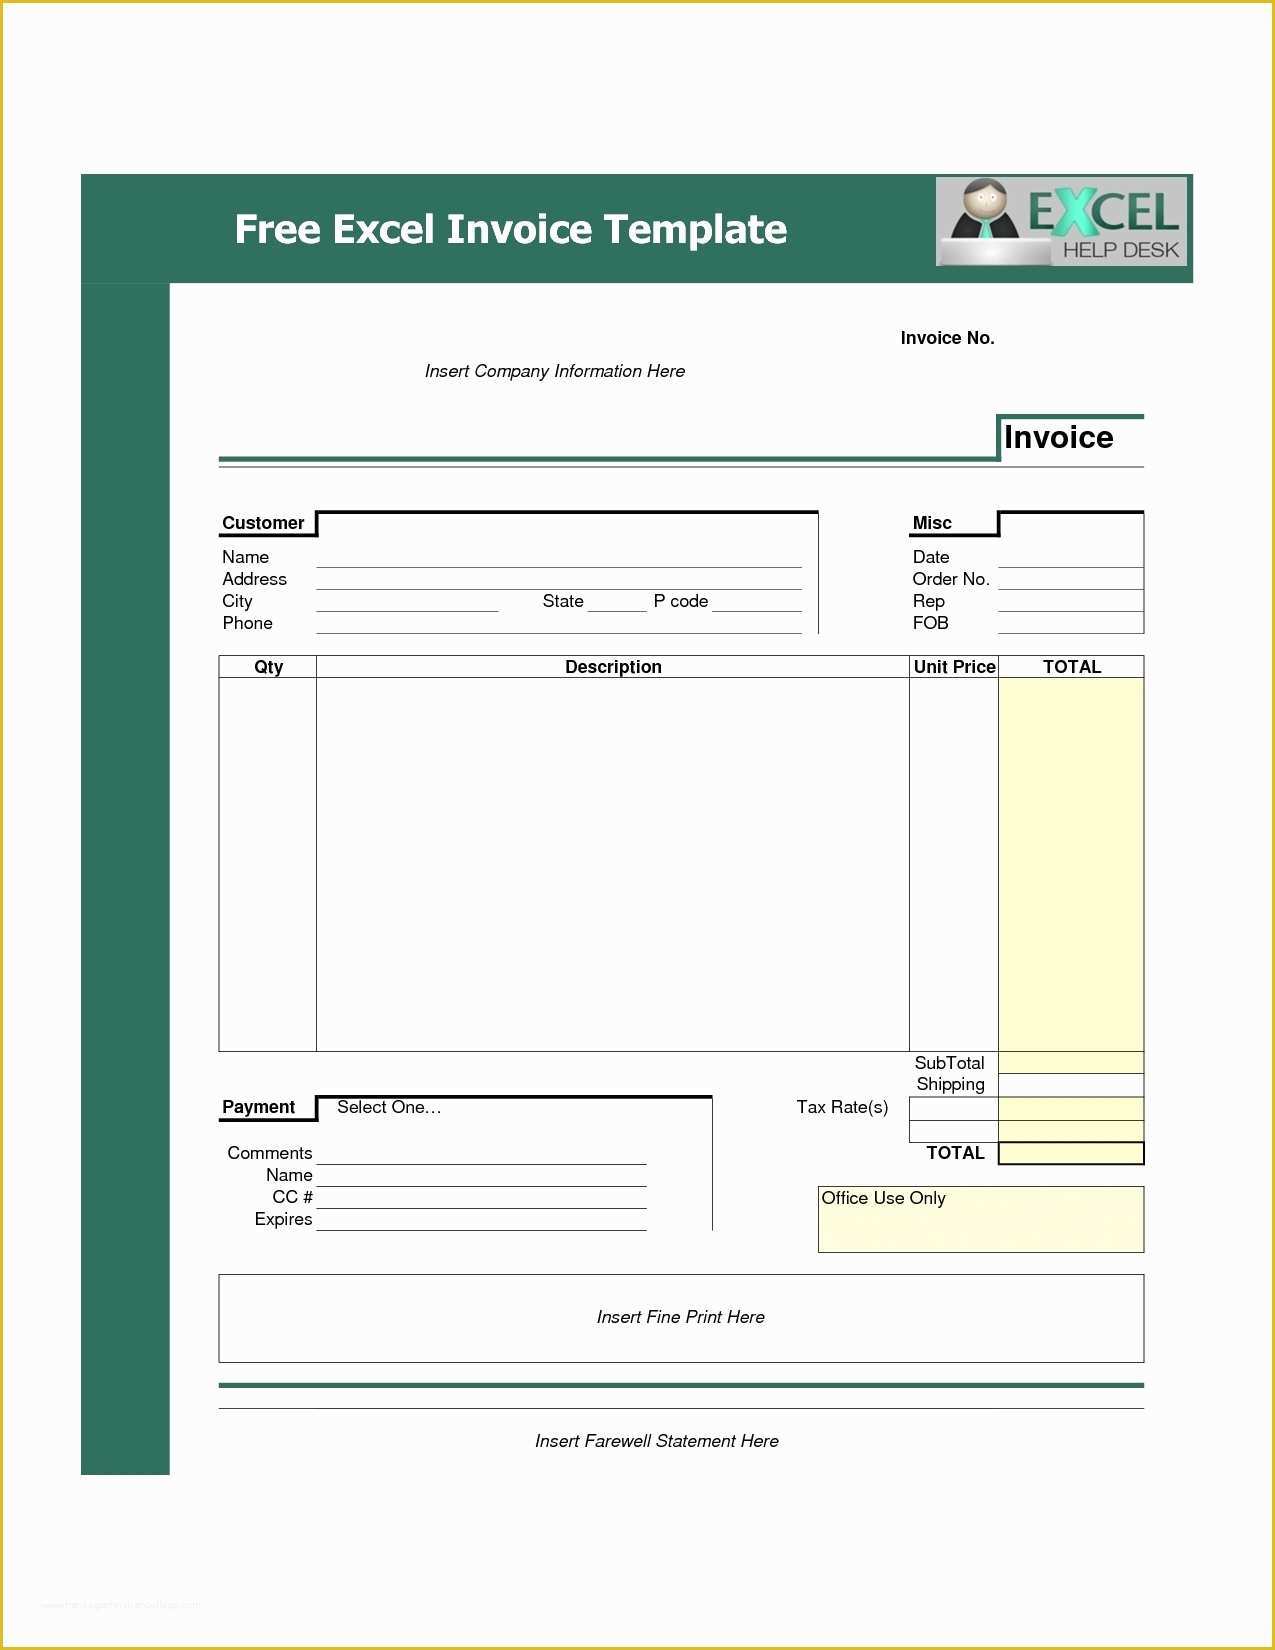 Microsoft Excel Invoice Template Free Of Invoice Template Free Download Excel Invoice Template Ideas